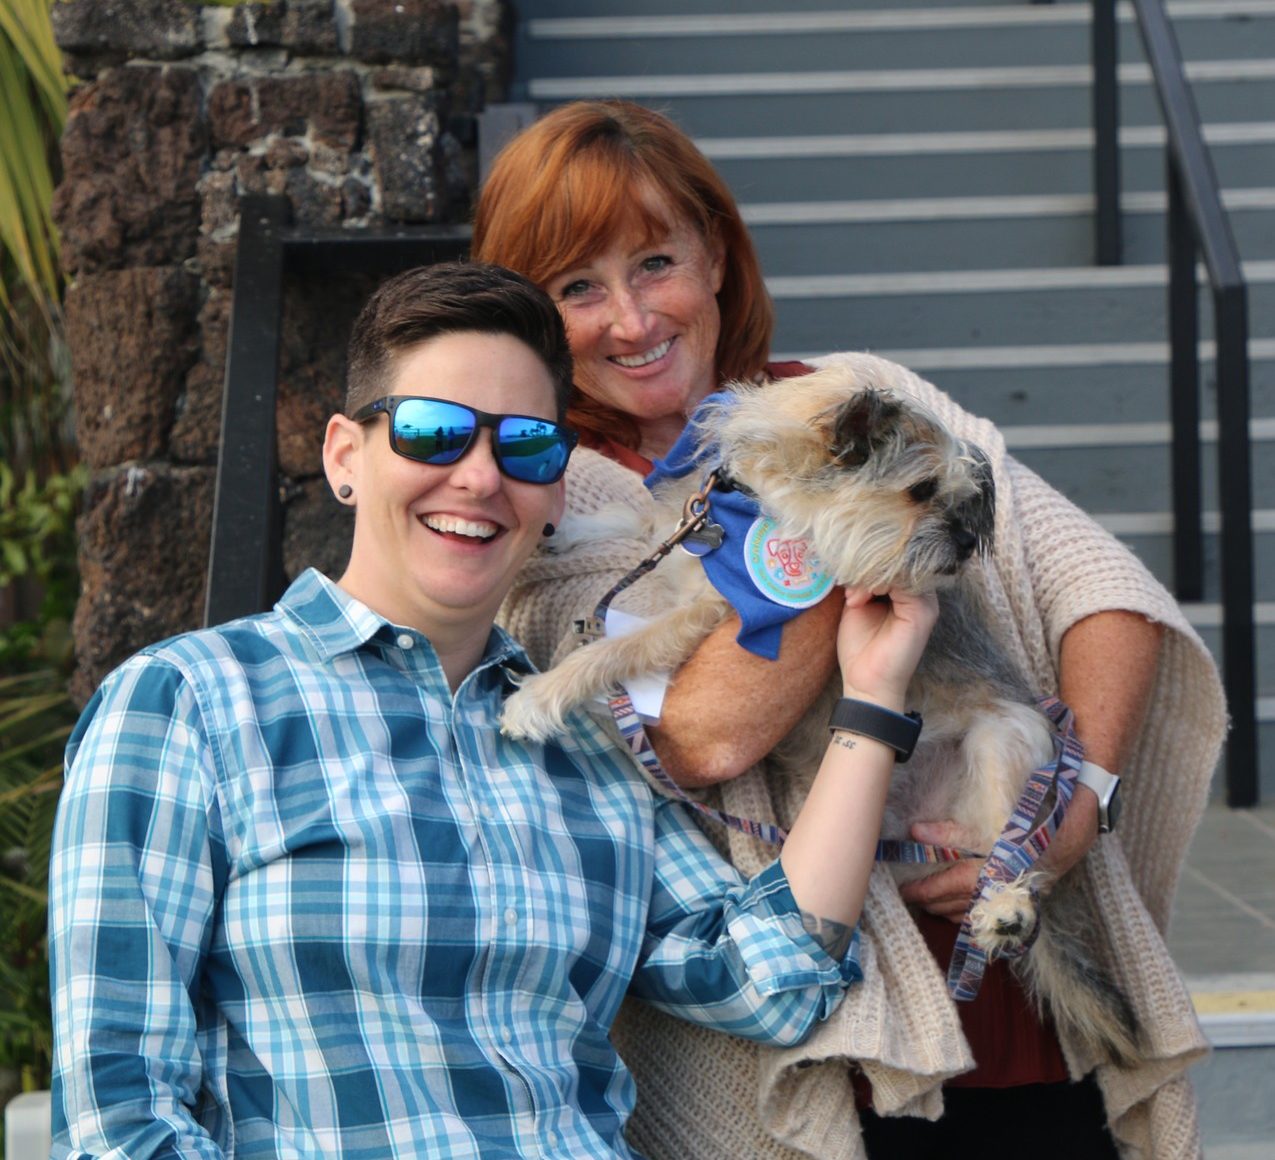 A brunette woman with a cropped haircut, sunglasses, and a blue plaid shirt stands beside a red-headed woman in a cream-colored sweater holding a small, scruffy, cream-colored dog. They are standing in front of an outdoor staircase and smiling.